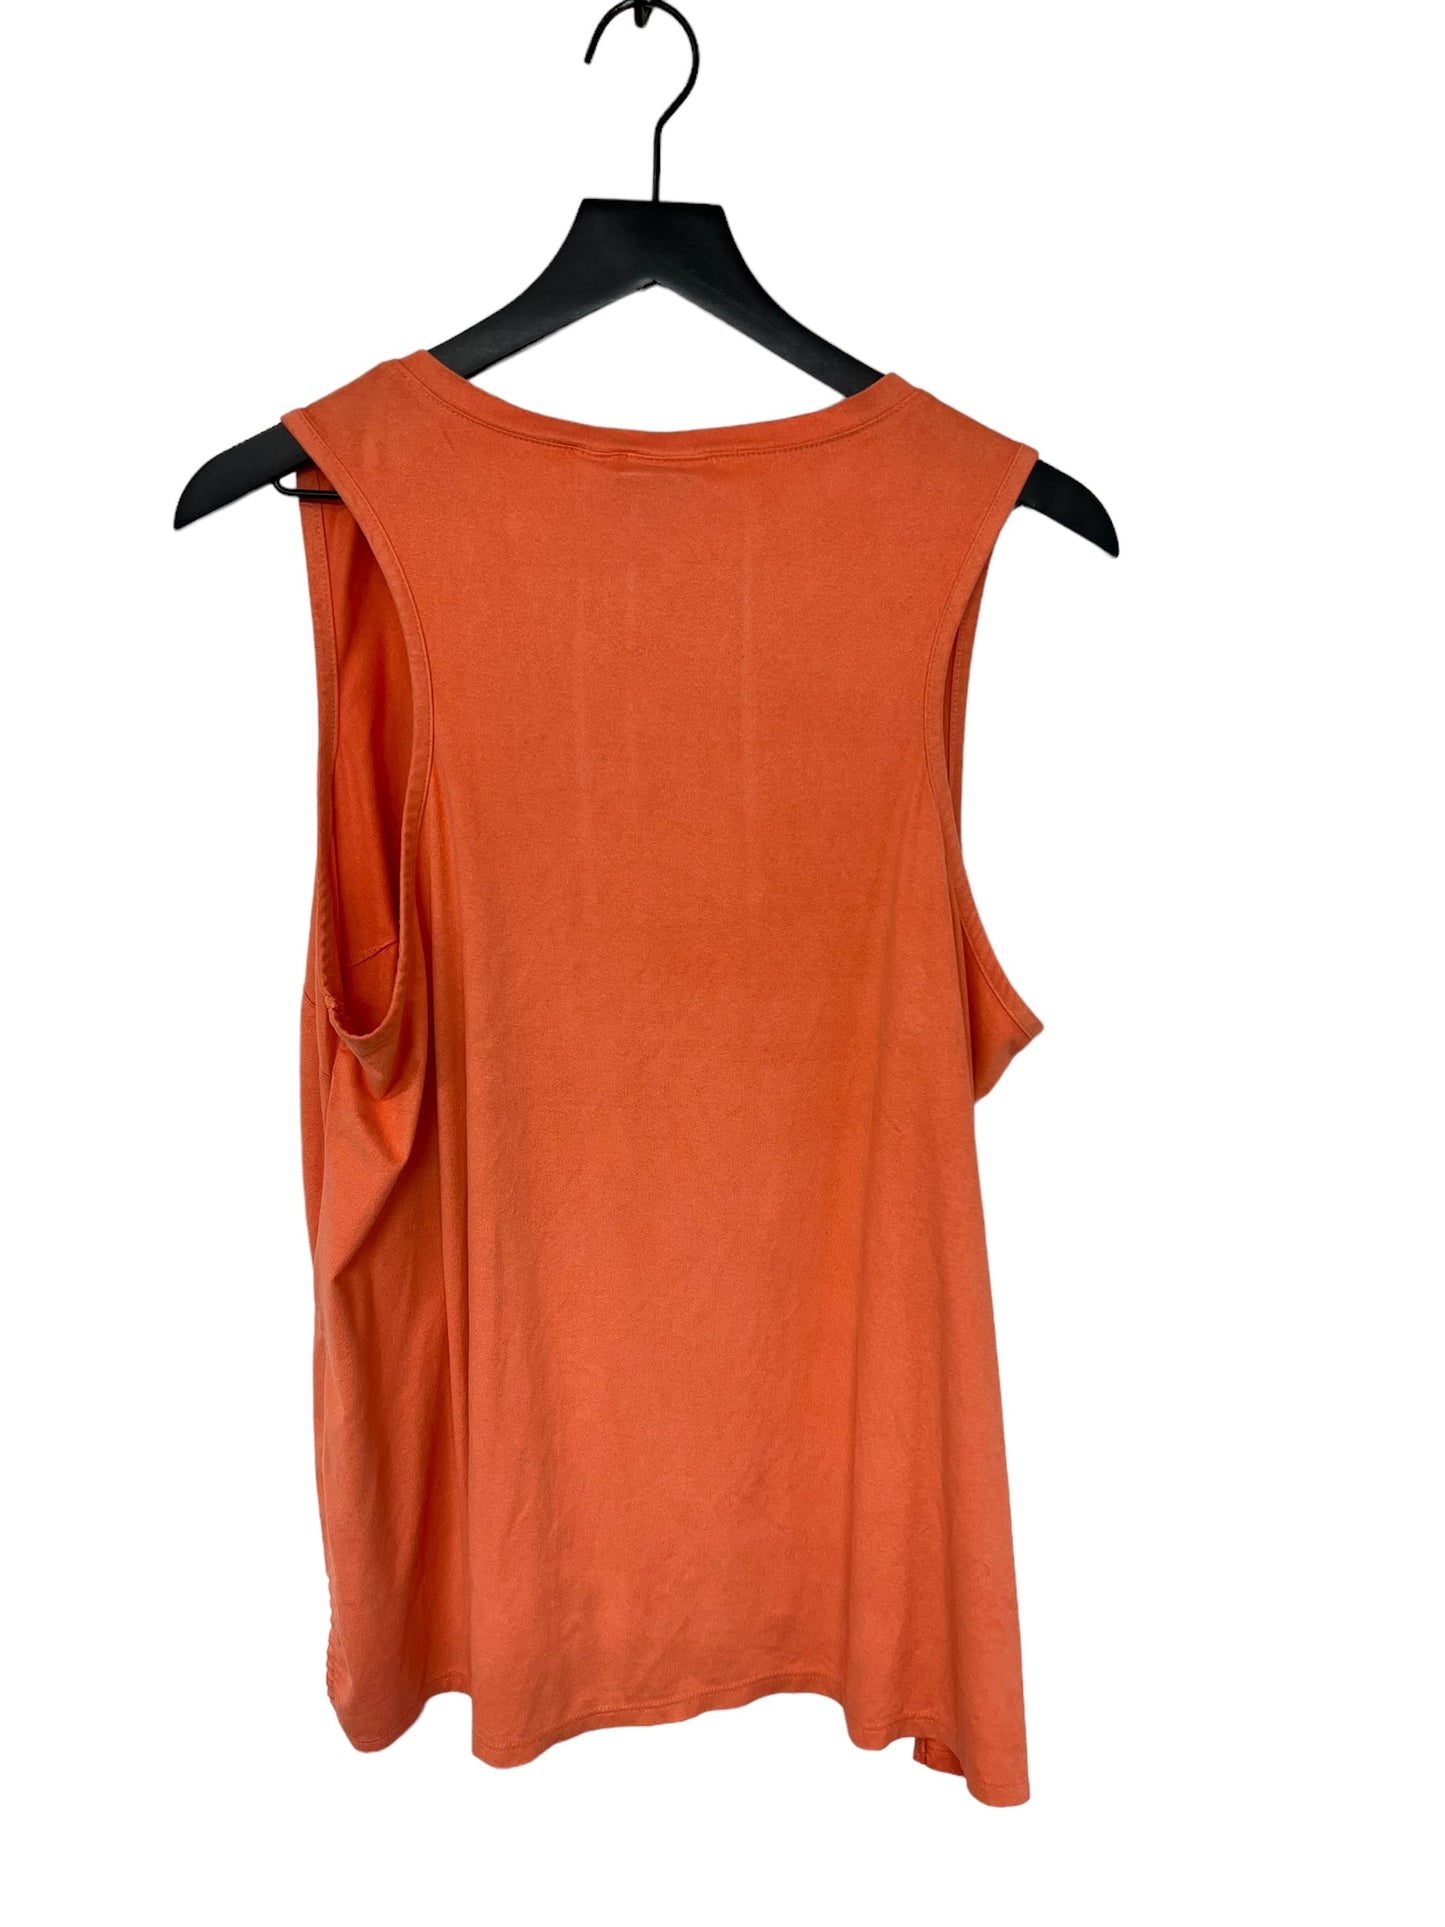 Top Sleeveless By Cato  Size: 2x